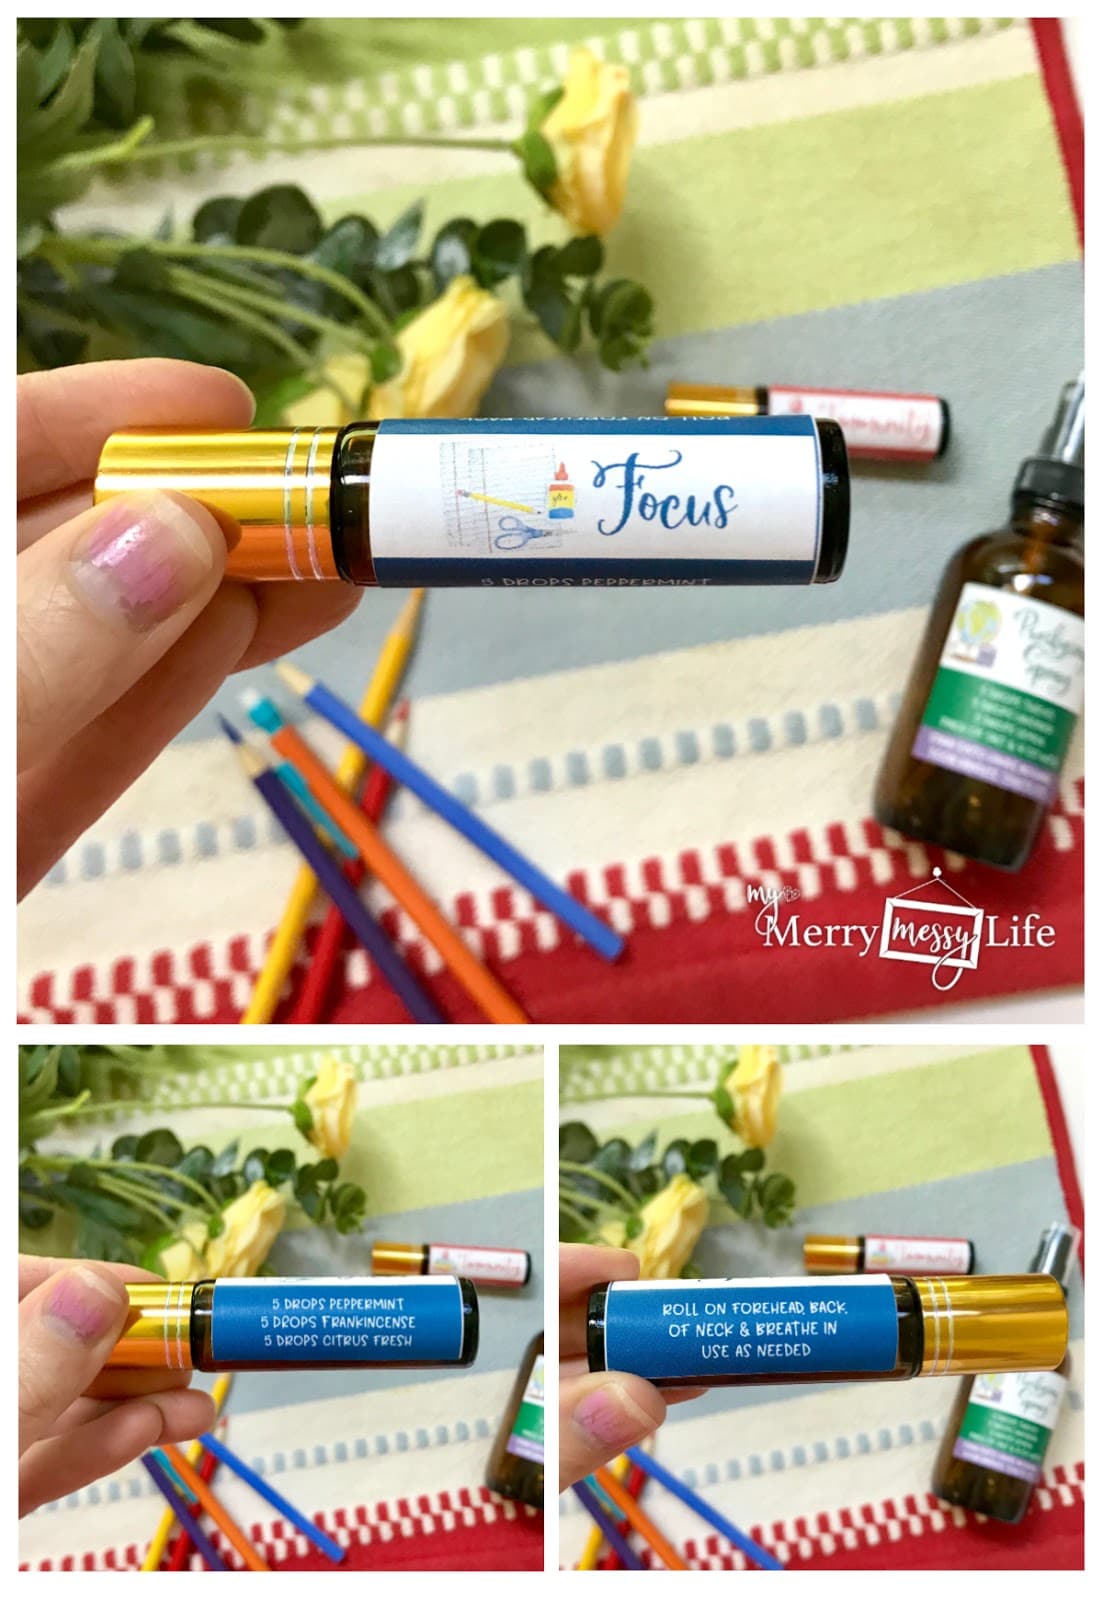 Focus Roller Bottle Essential Oil Recipe and Label for Back to School